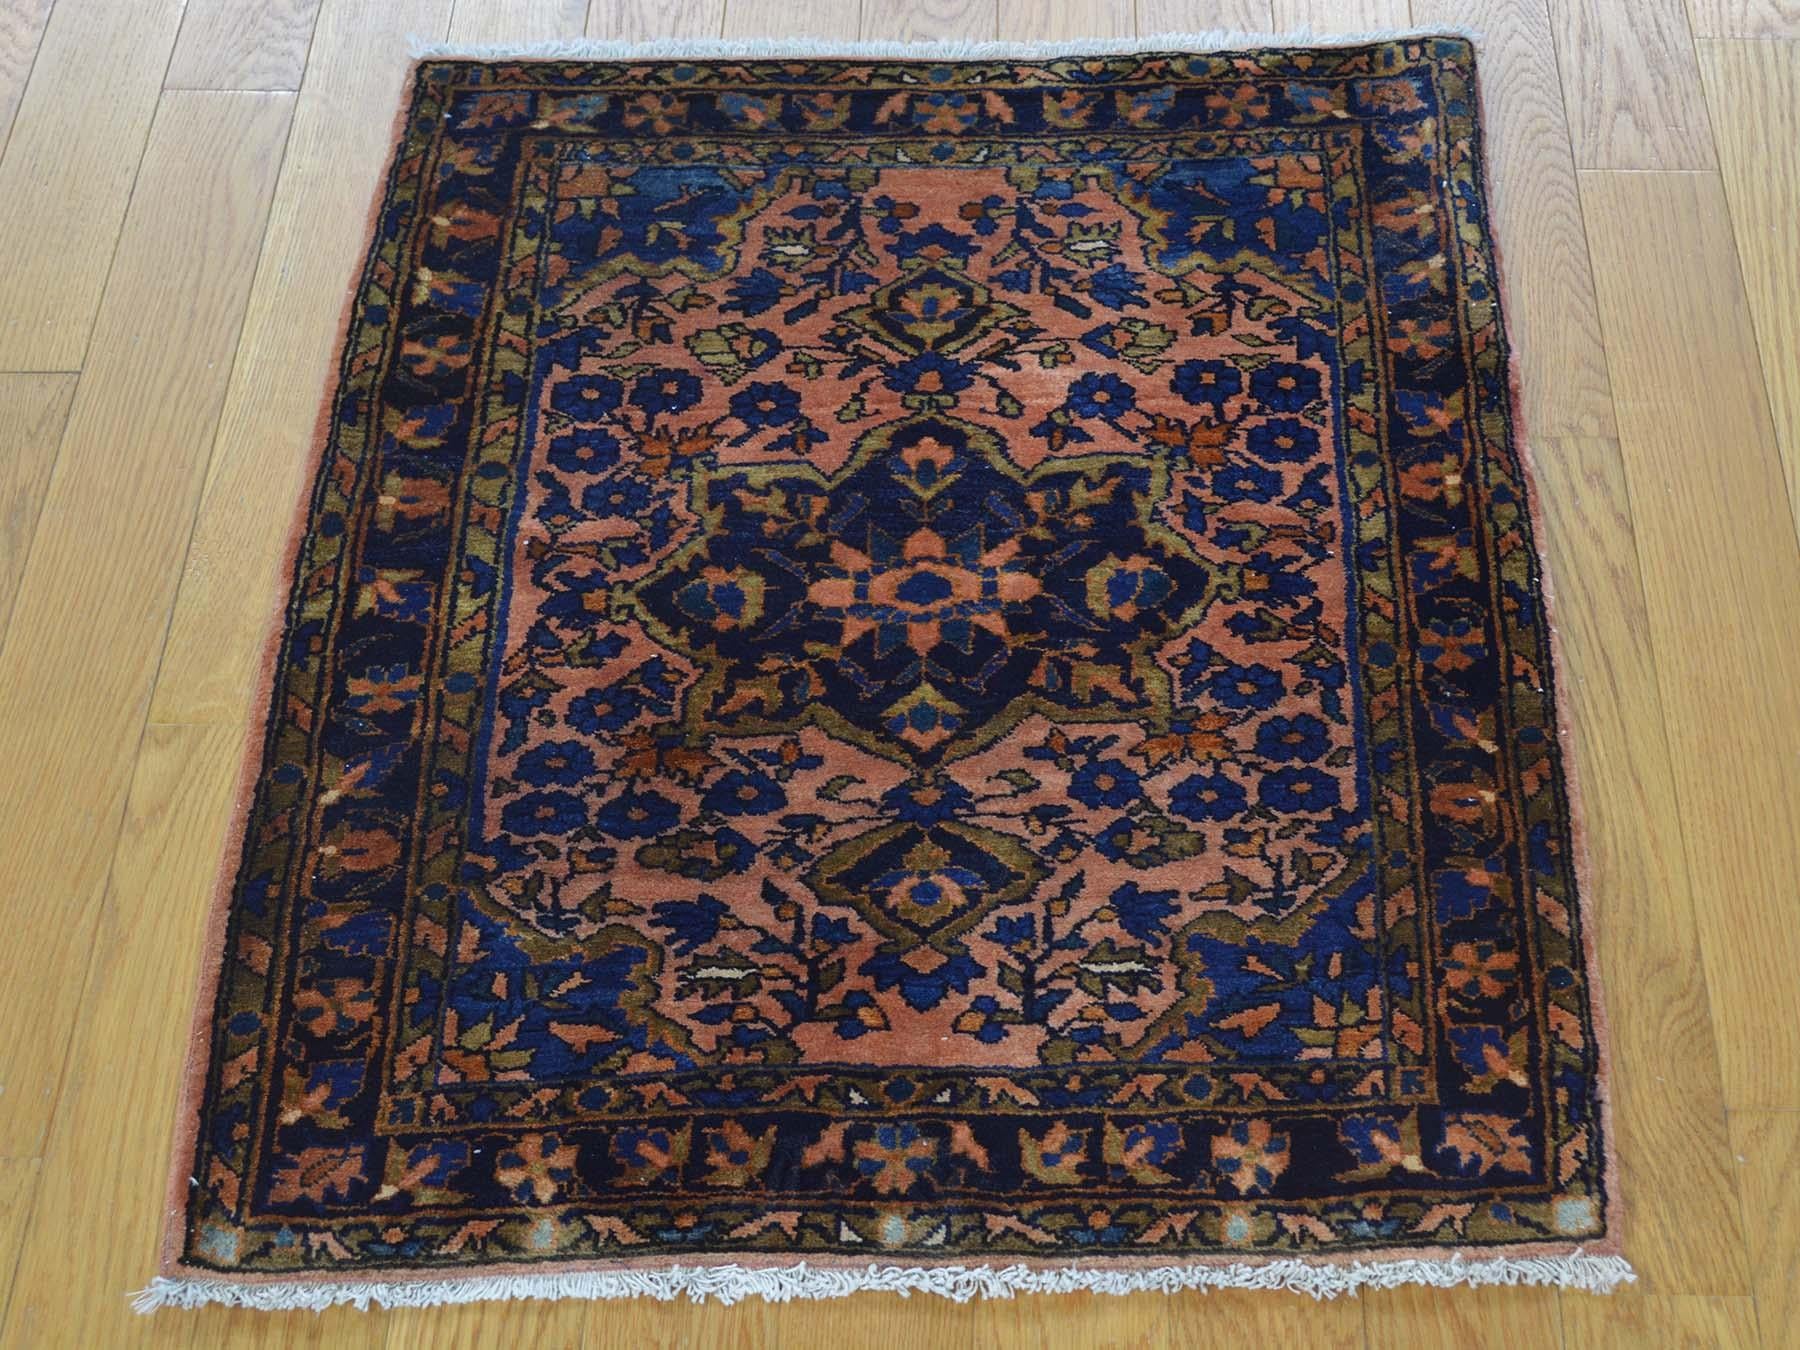 Revive your home style with this beautiful antique carpet. This handcrafted Persian mohajeran Sarouk, is an original full pile soft and clean oriental rug. This rare piece has been knotted for months and months in the centuries old traditional